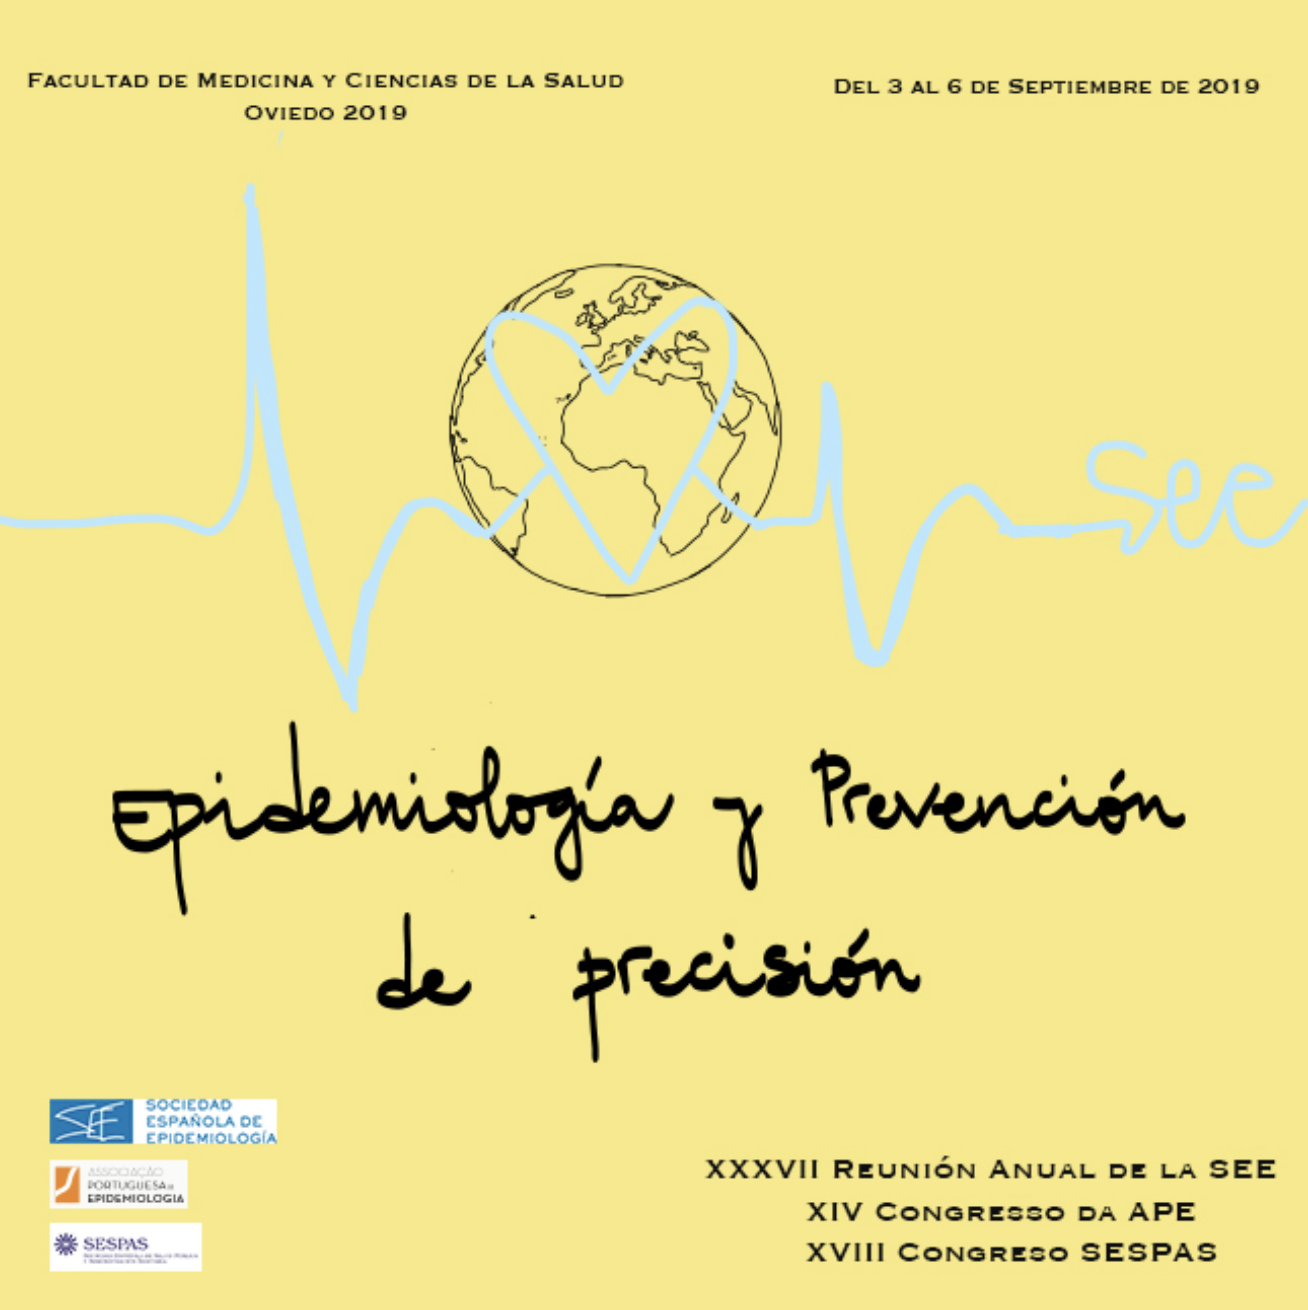 Results of the Equity-LA II project at the congress on public health and health administration in Oviedo (Spain)